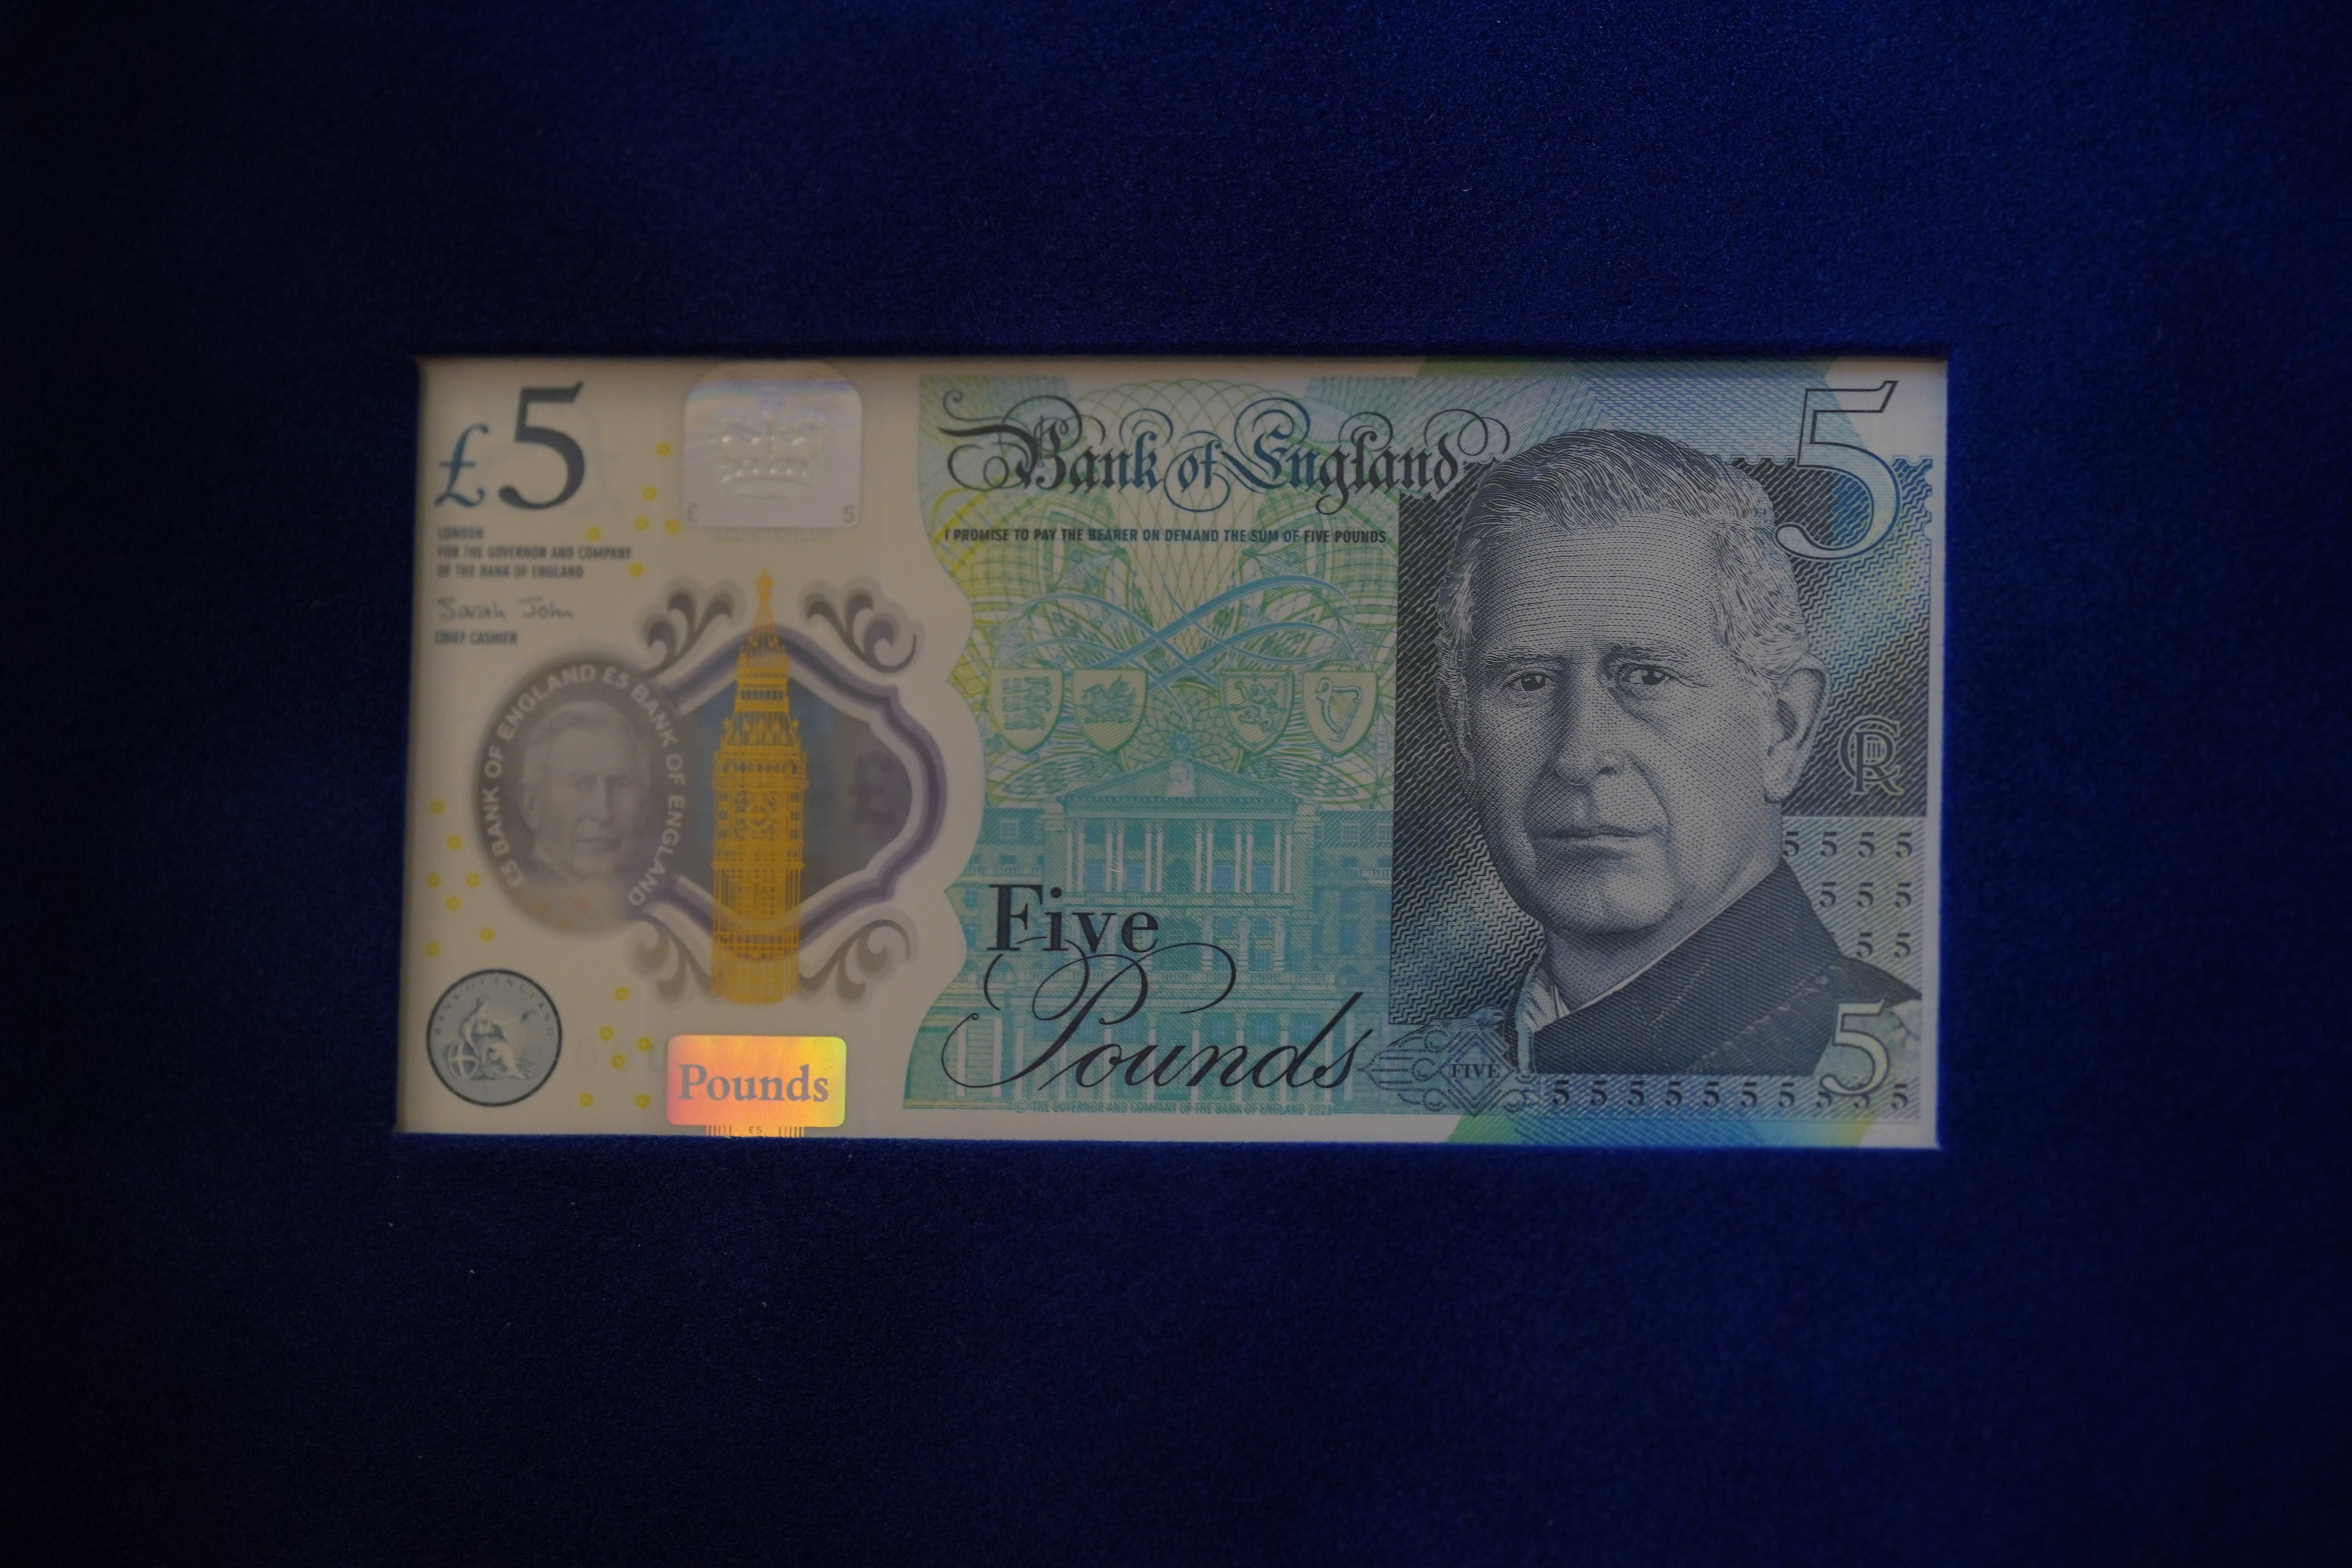 The new notes entered circulation in June.